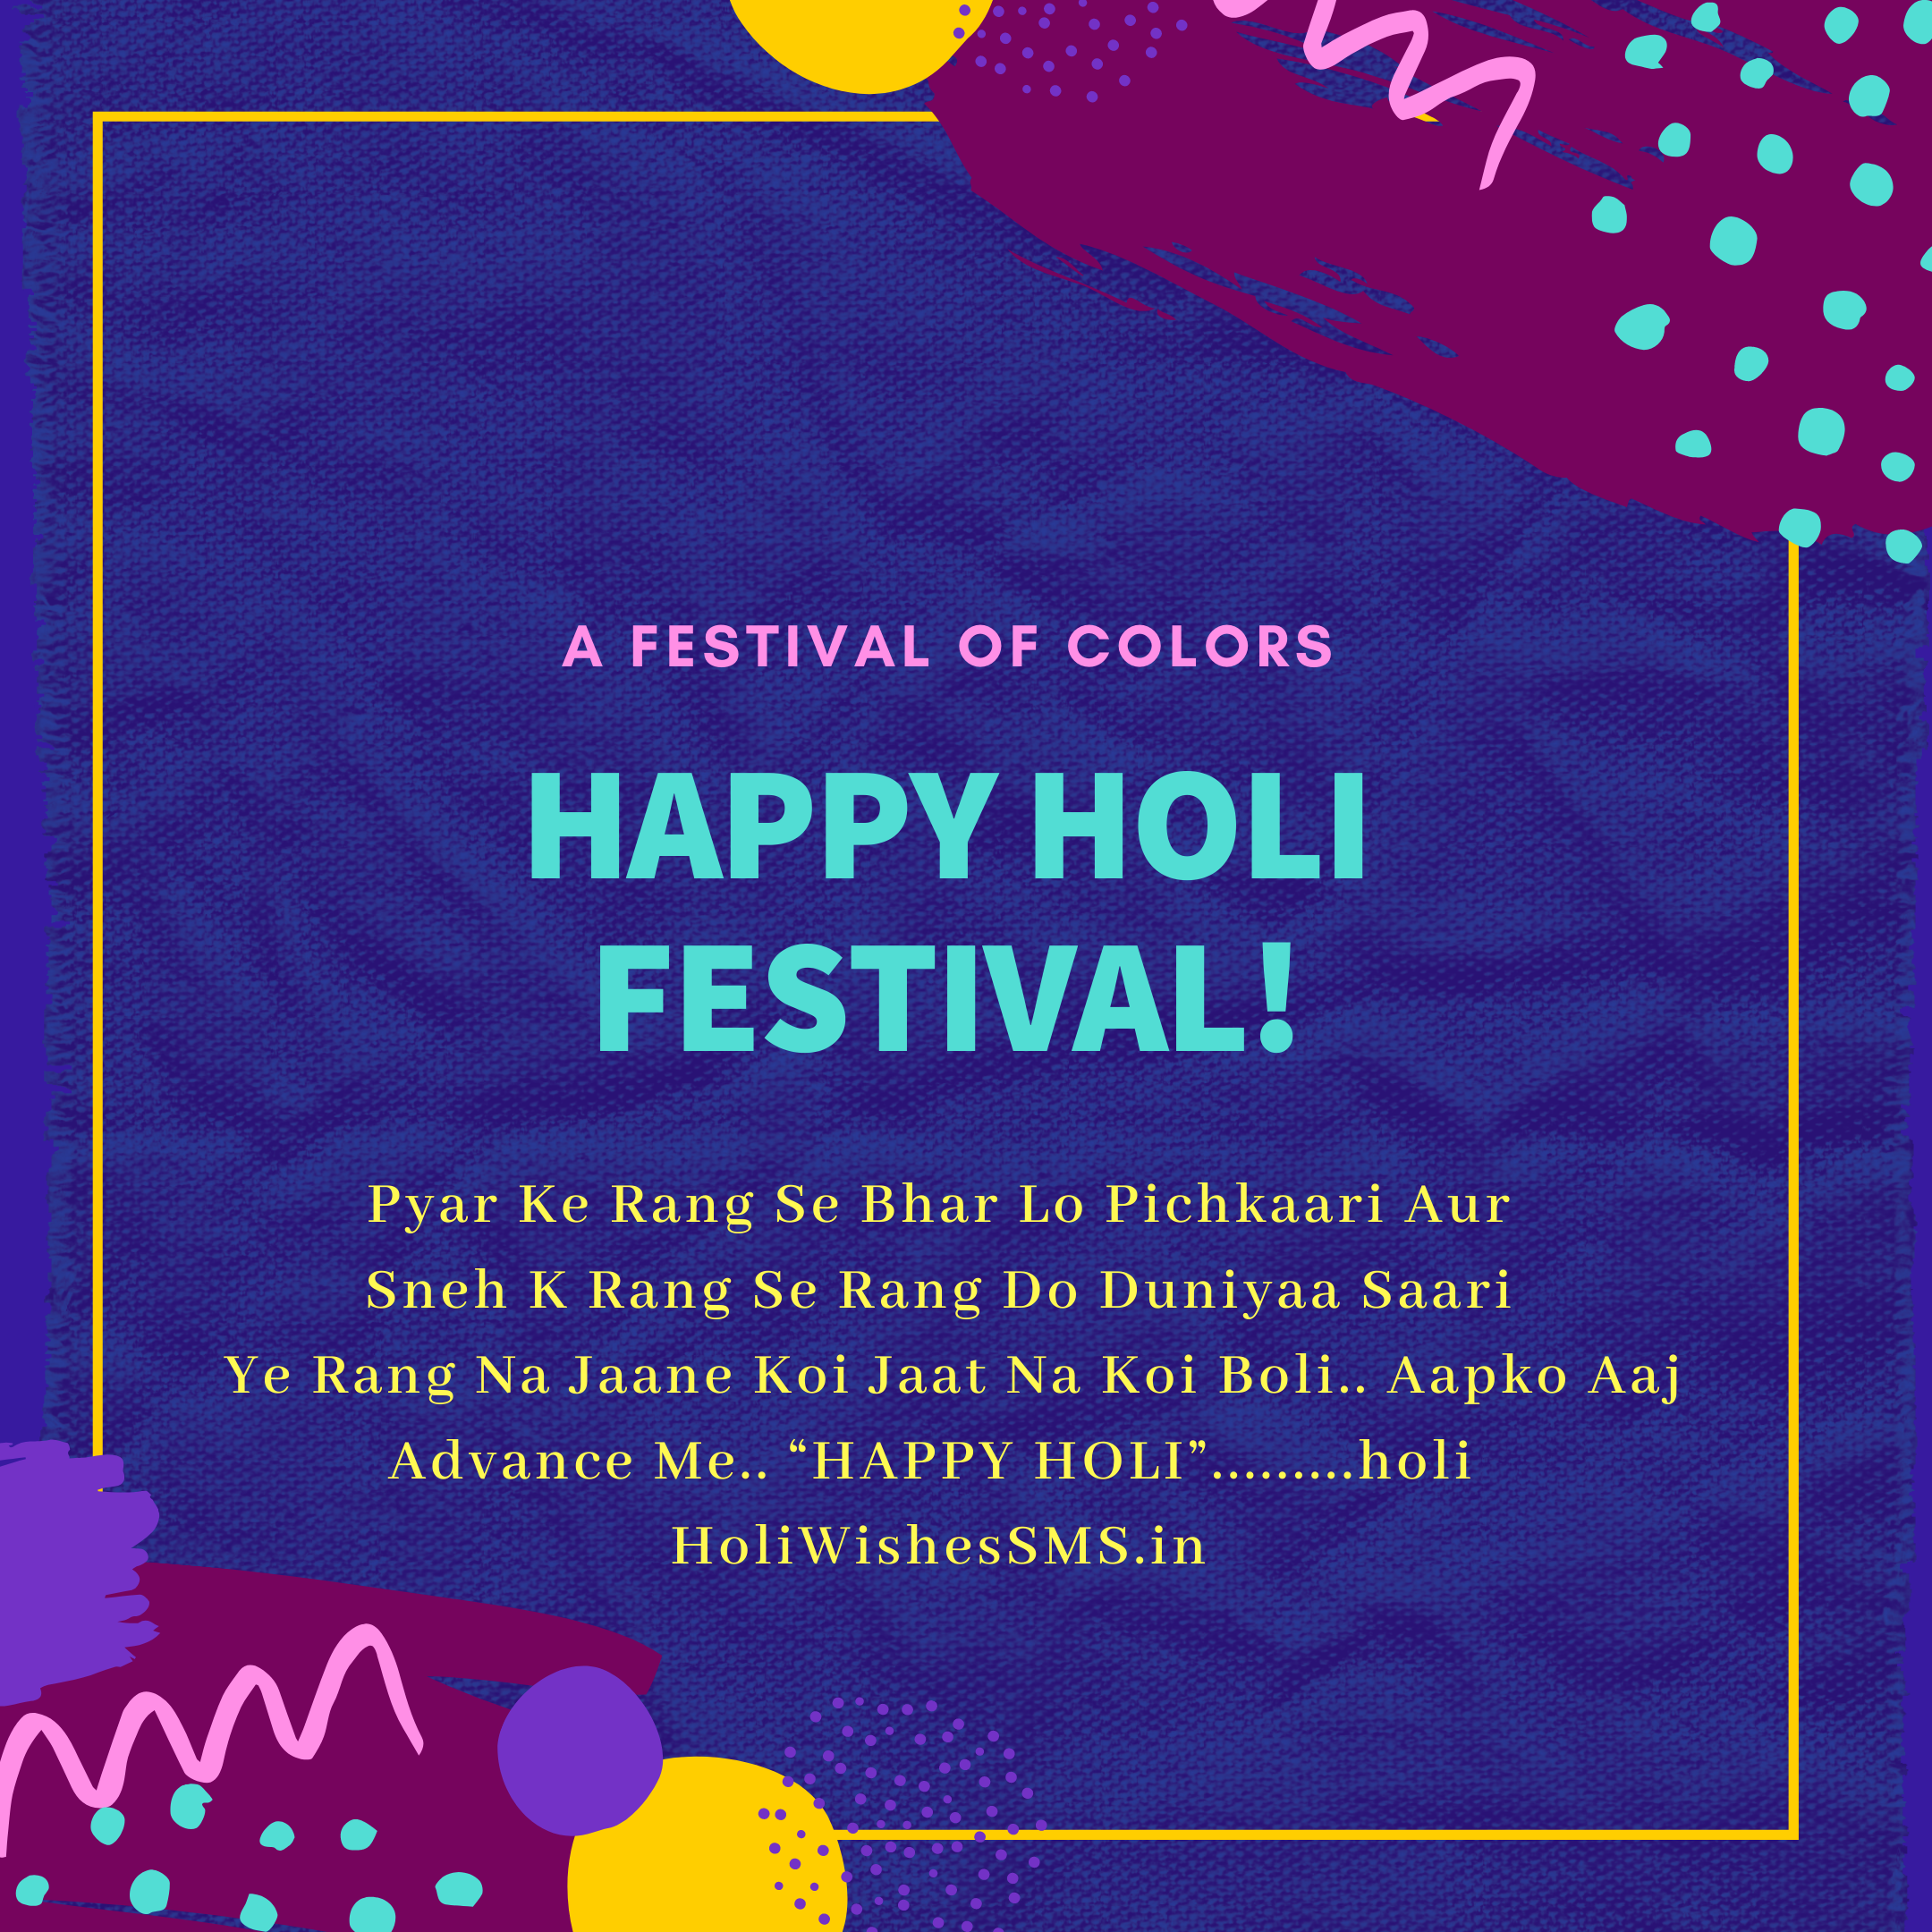 Free download Happy Holi Images 2020 Wallpapers And Photos In Status Wishes  [2160x2160] for your Desktop, Mobile & Tablet | Explore 26+ Happy Holi 2020  Wallpapers | Holi Wallpaper, Animated Happy Holi Wallpaper, Happy Holi 2019  Wallpapers